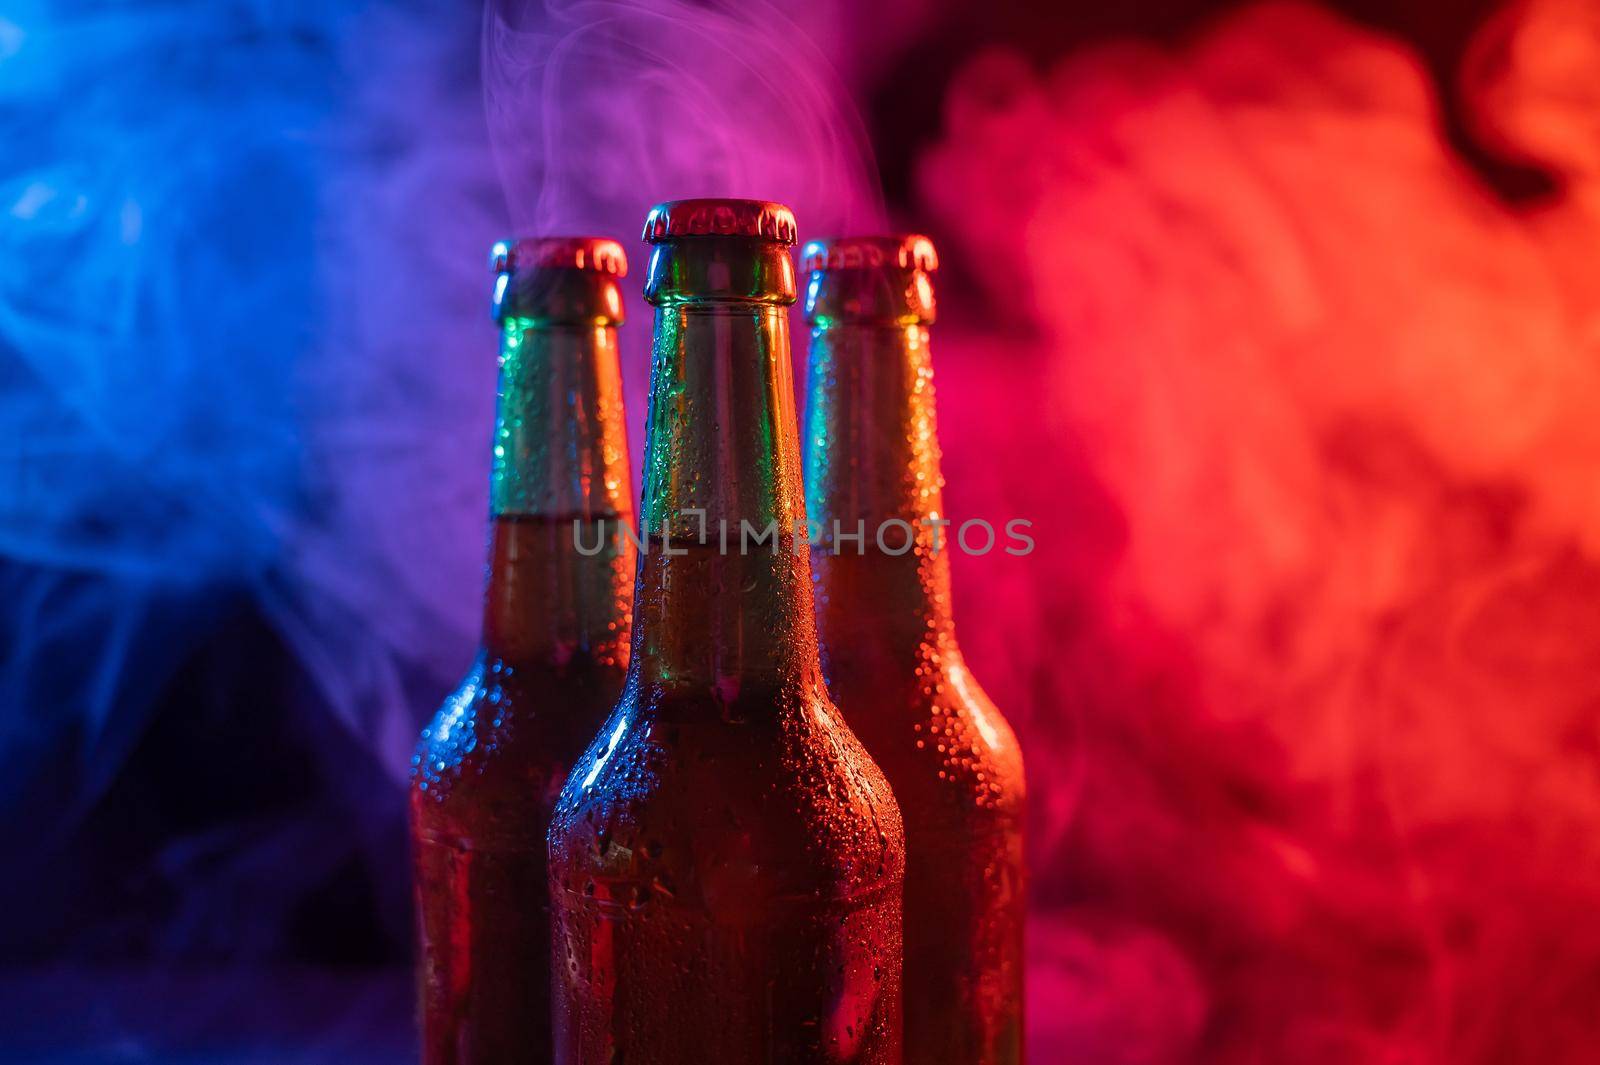 Three bottles of beer in a blue-pink mist. by mrwed54